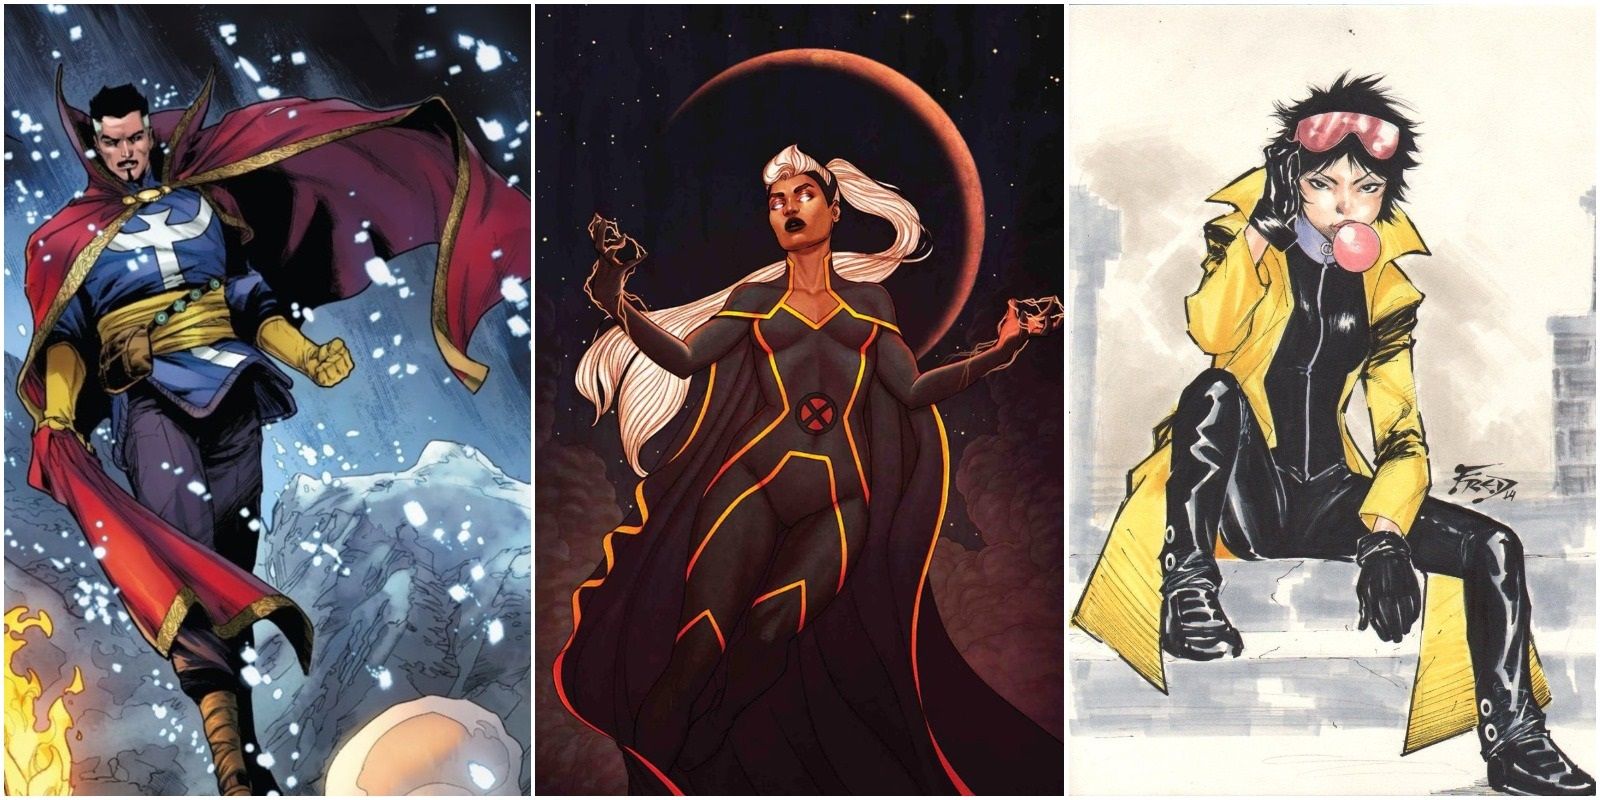 Doctor Strange, Storm, and Jubilee would win in a fight